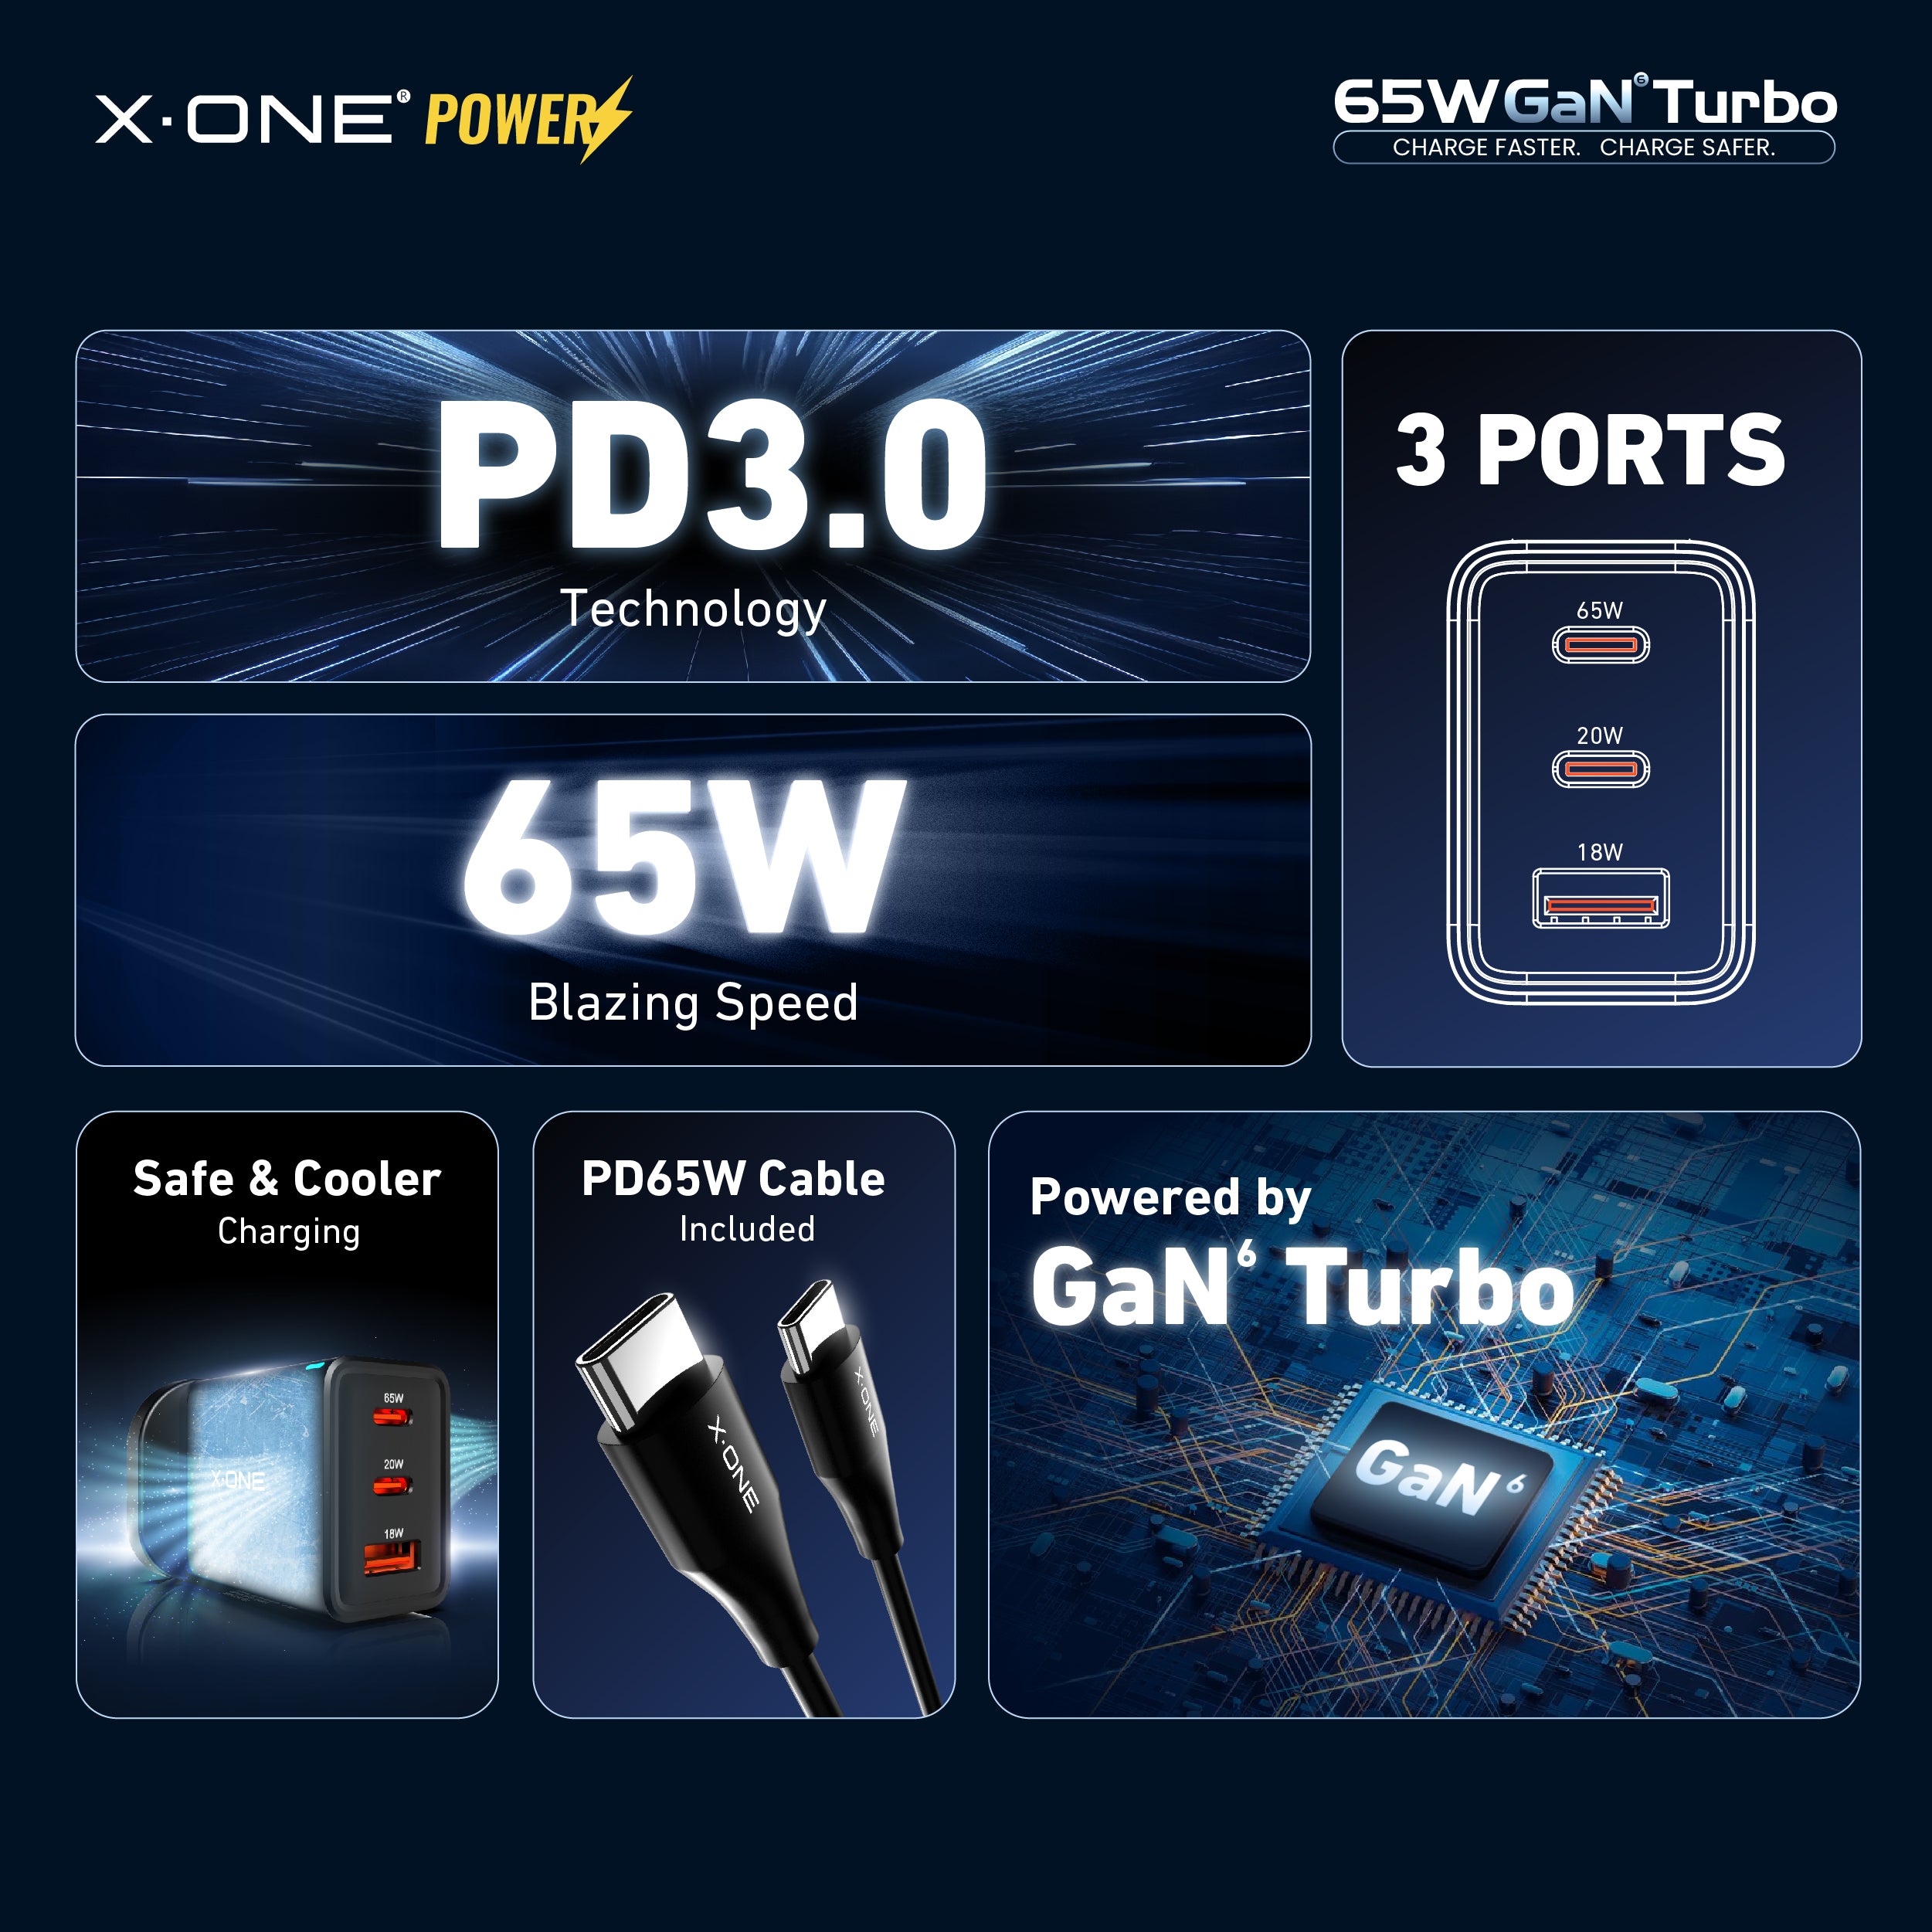 X.One® 65W GaN 6 Turbo Ultra Fast Charger (3-Ports)